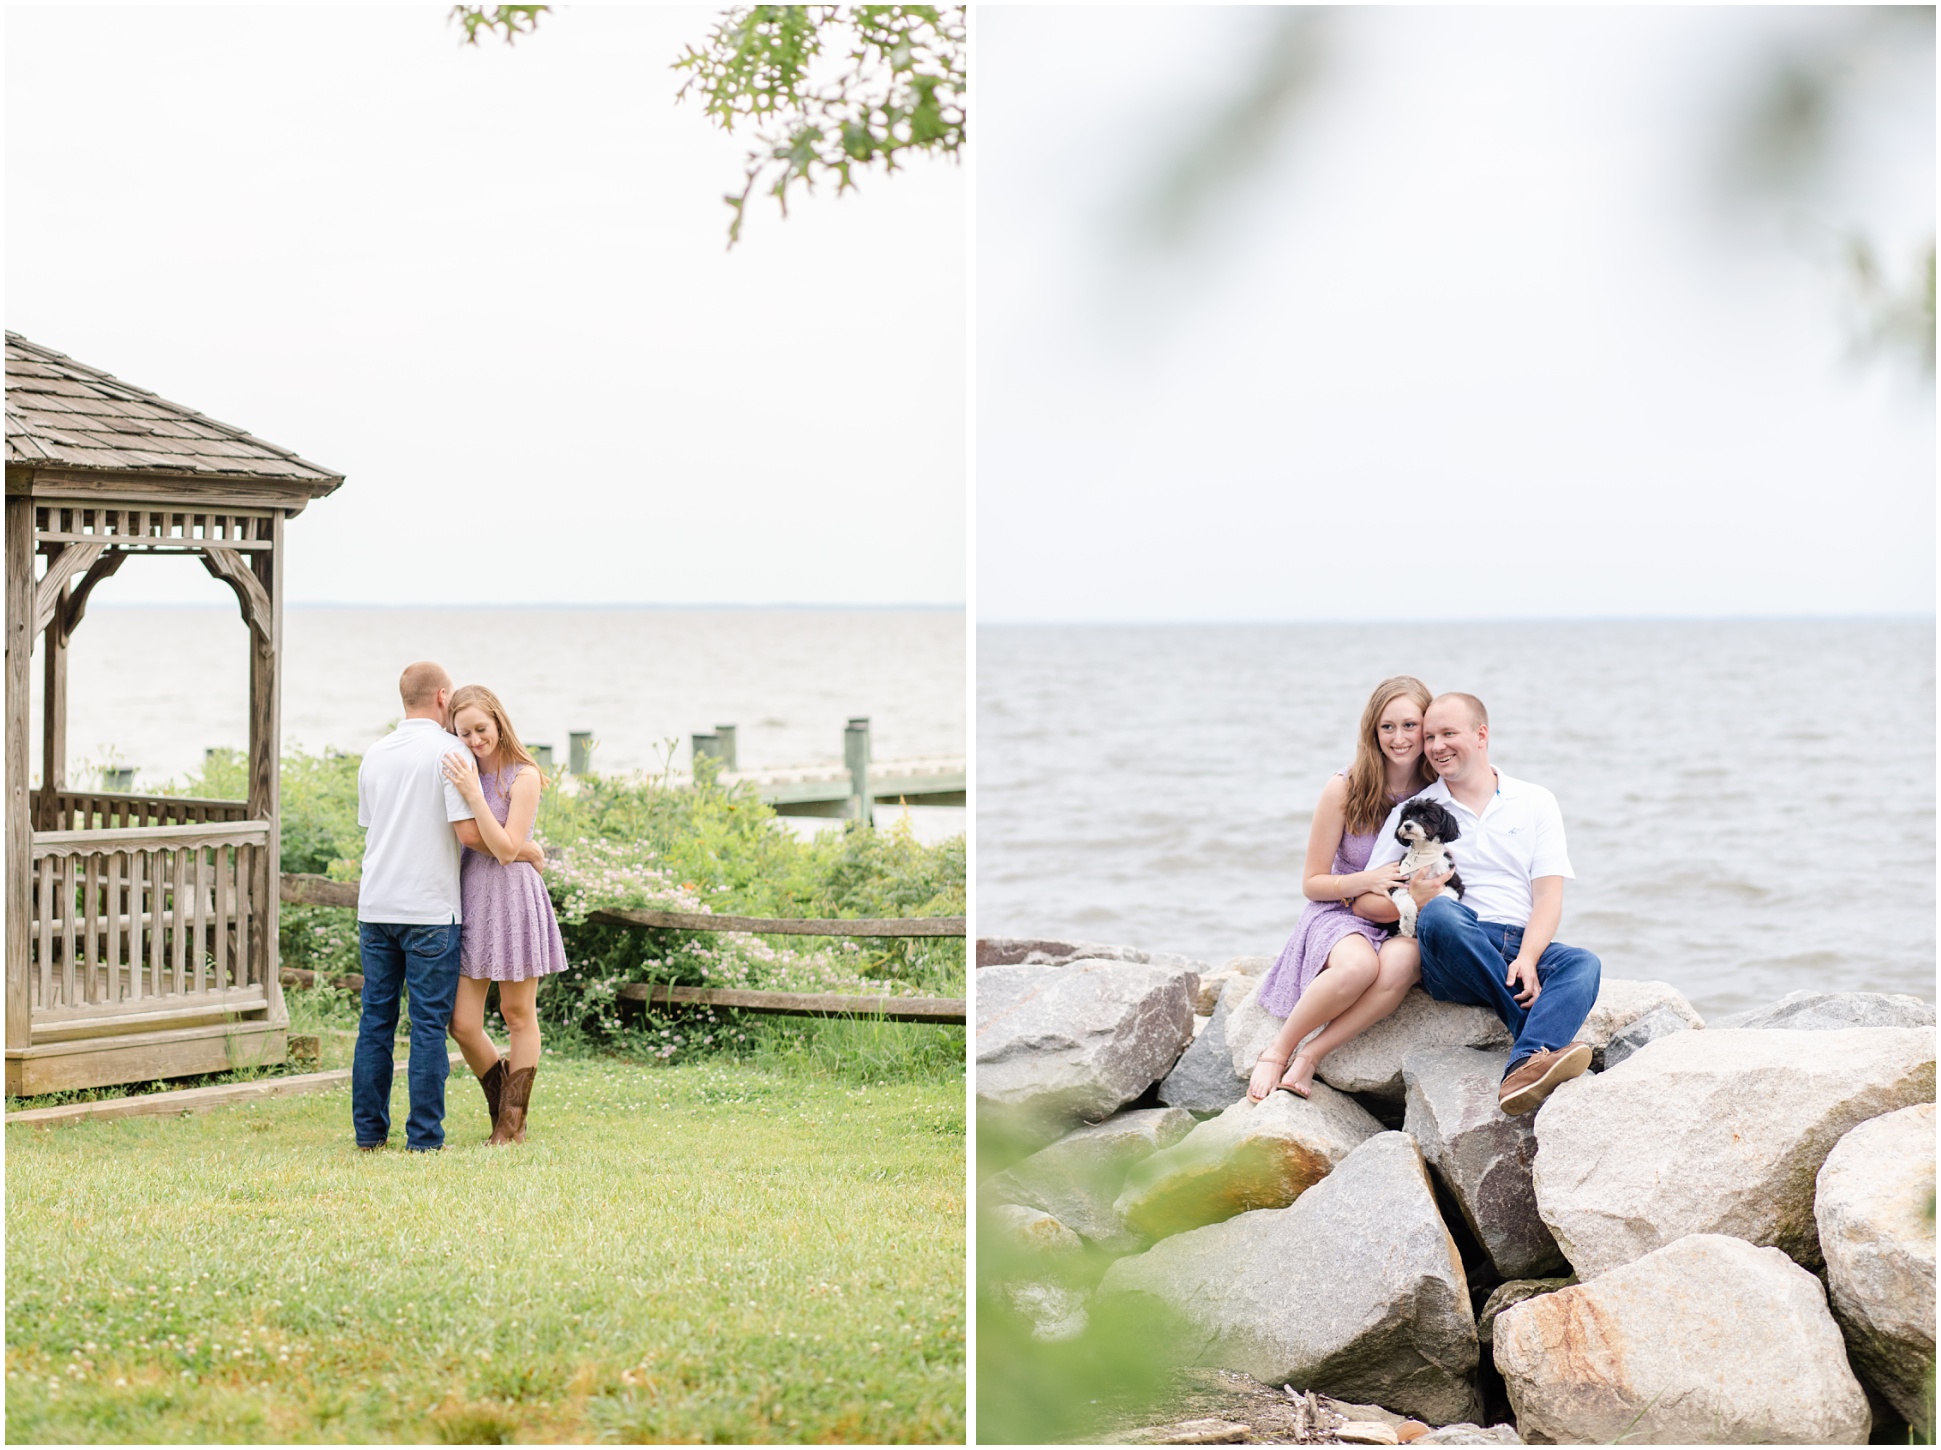 Engagement Session in Lavendar lace dress on the shore.